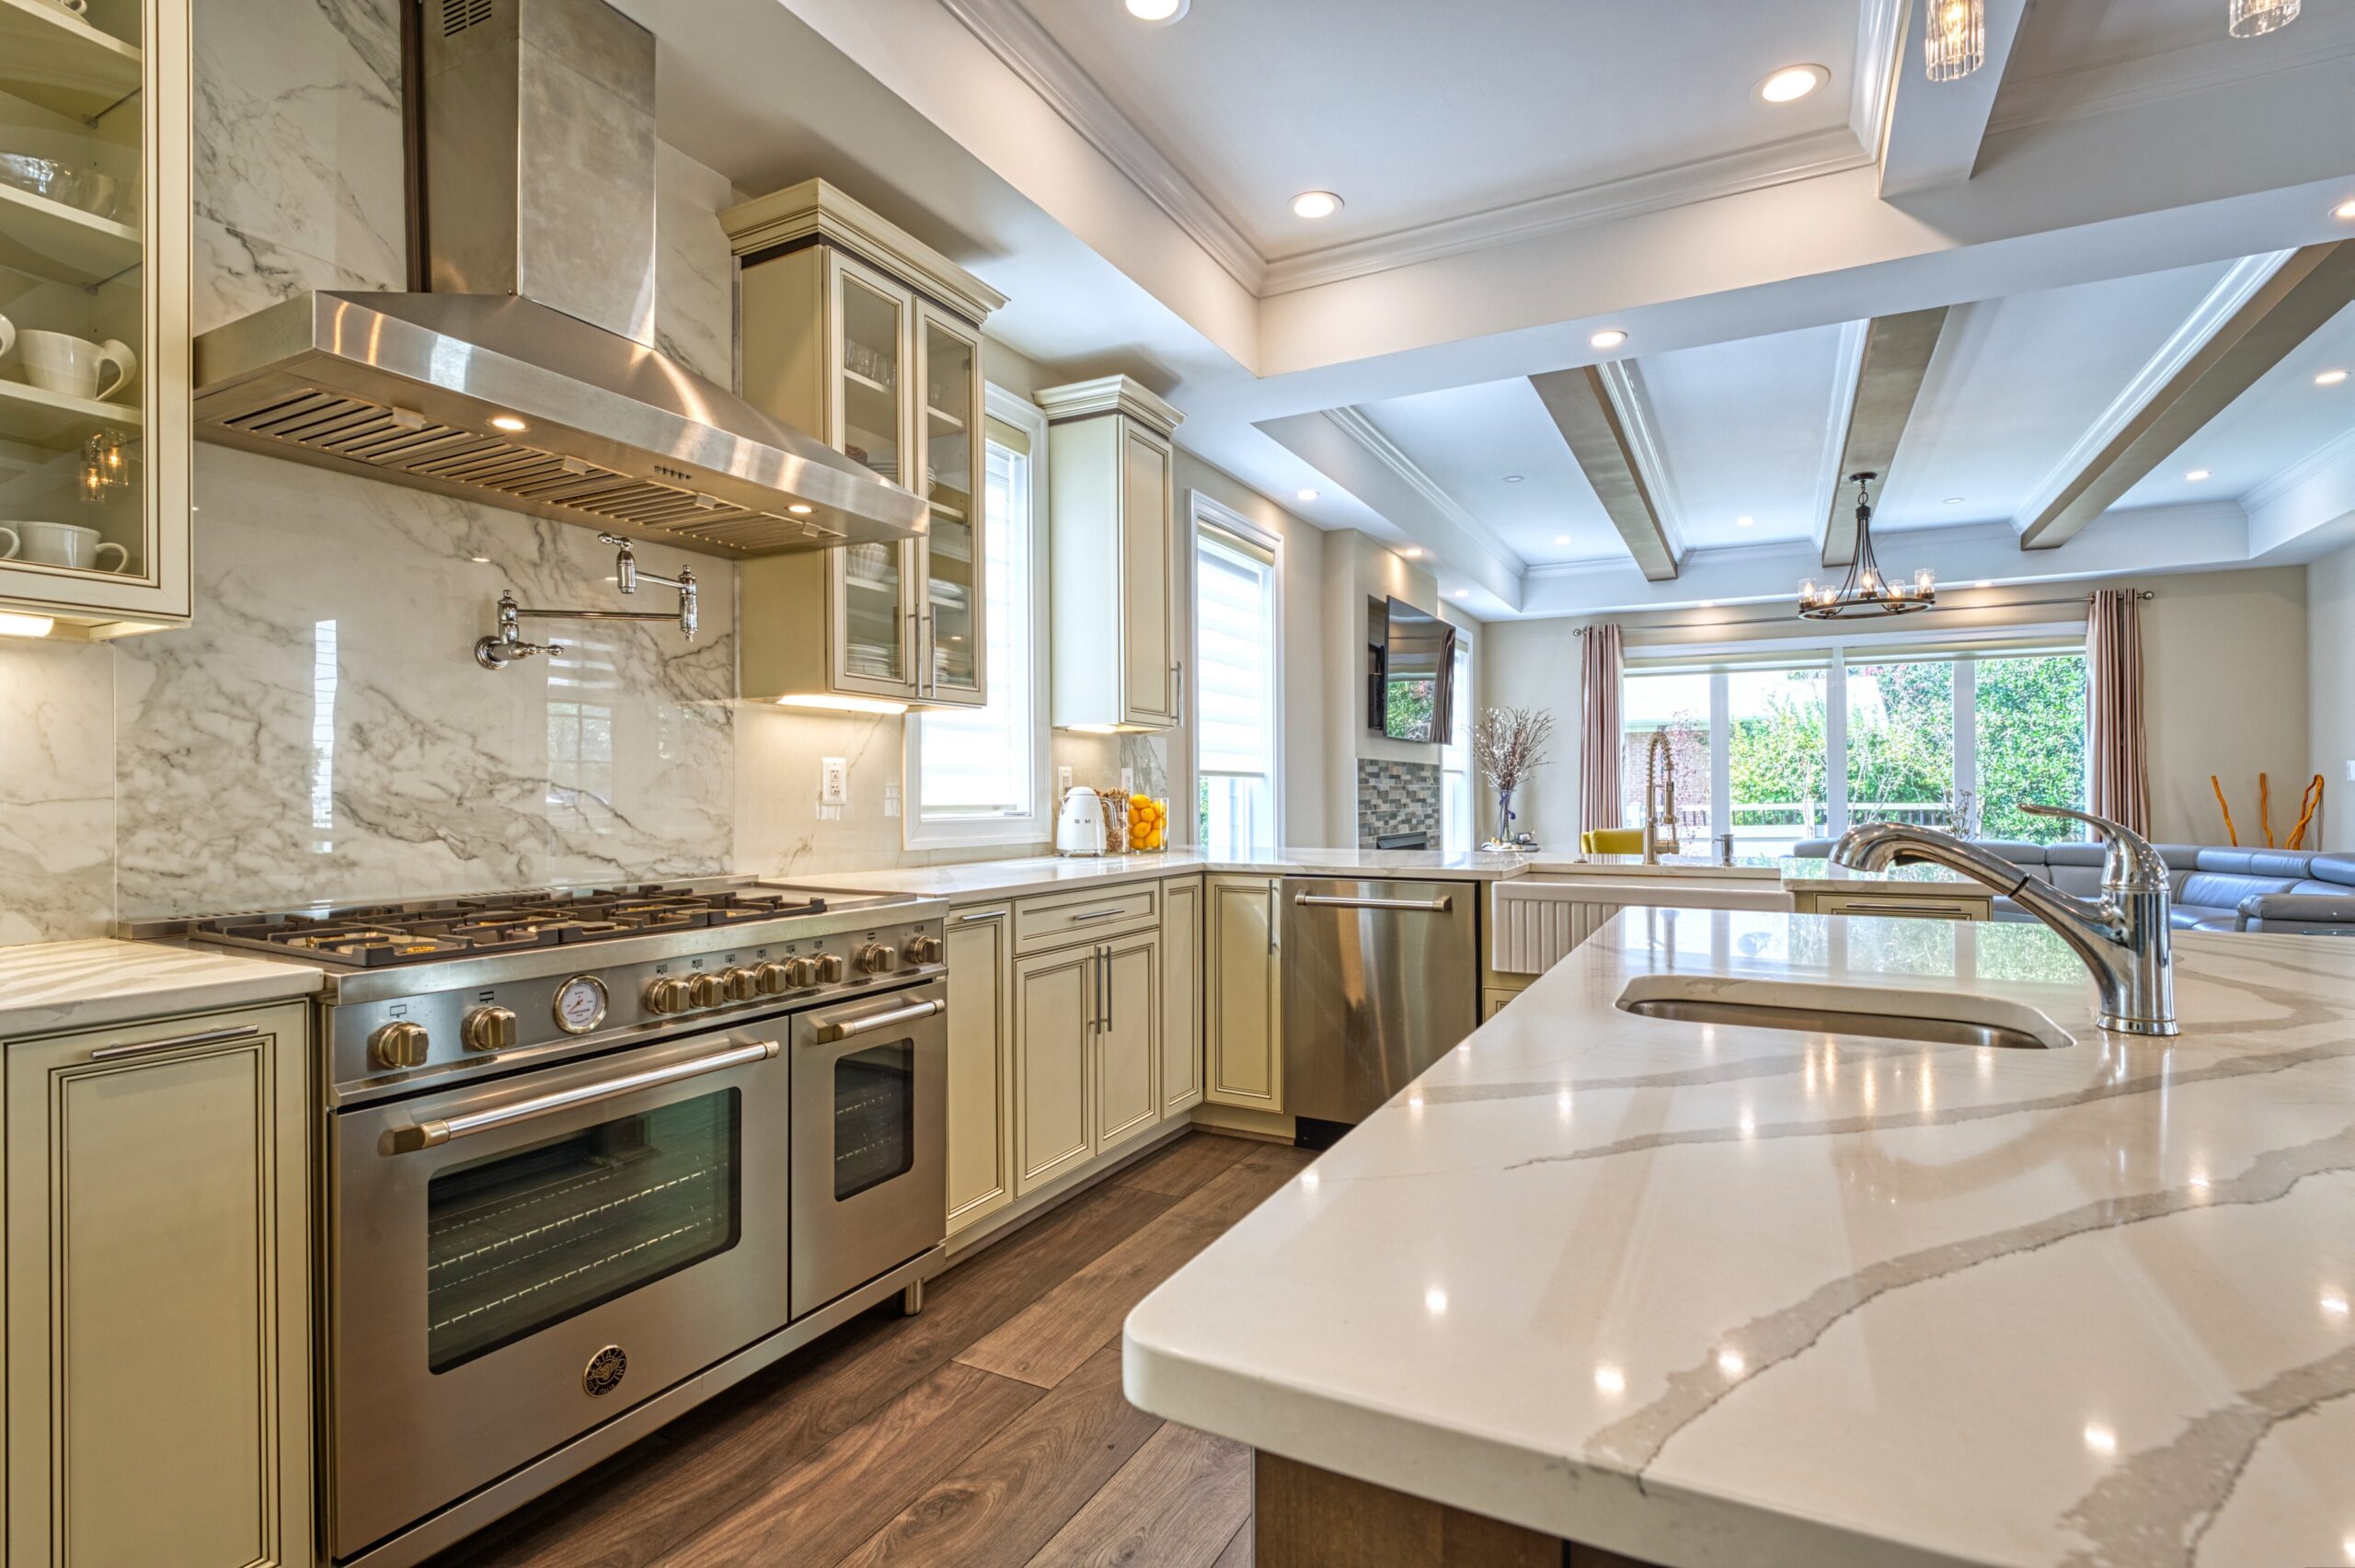 professional Fusion photo of the interior of a home in McLean, VA - showing gourmet kitchen with intricate coffered ceiling, huge counter, stainless hood/range and large kitchen island with quartz countertops